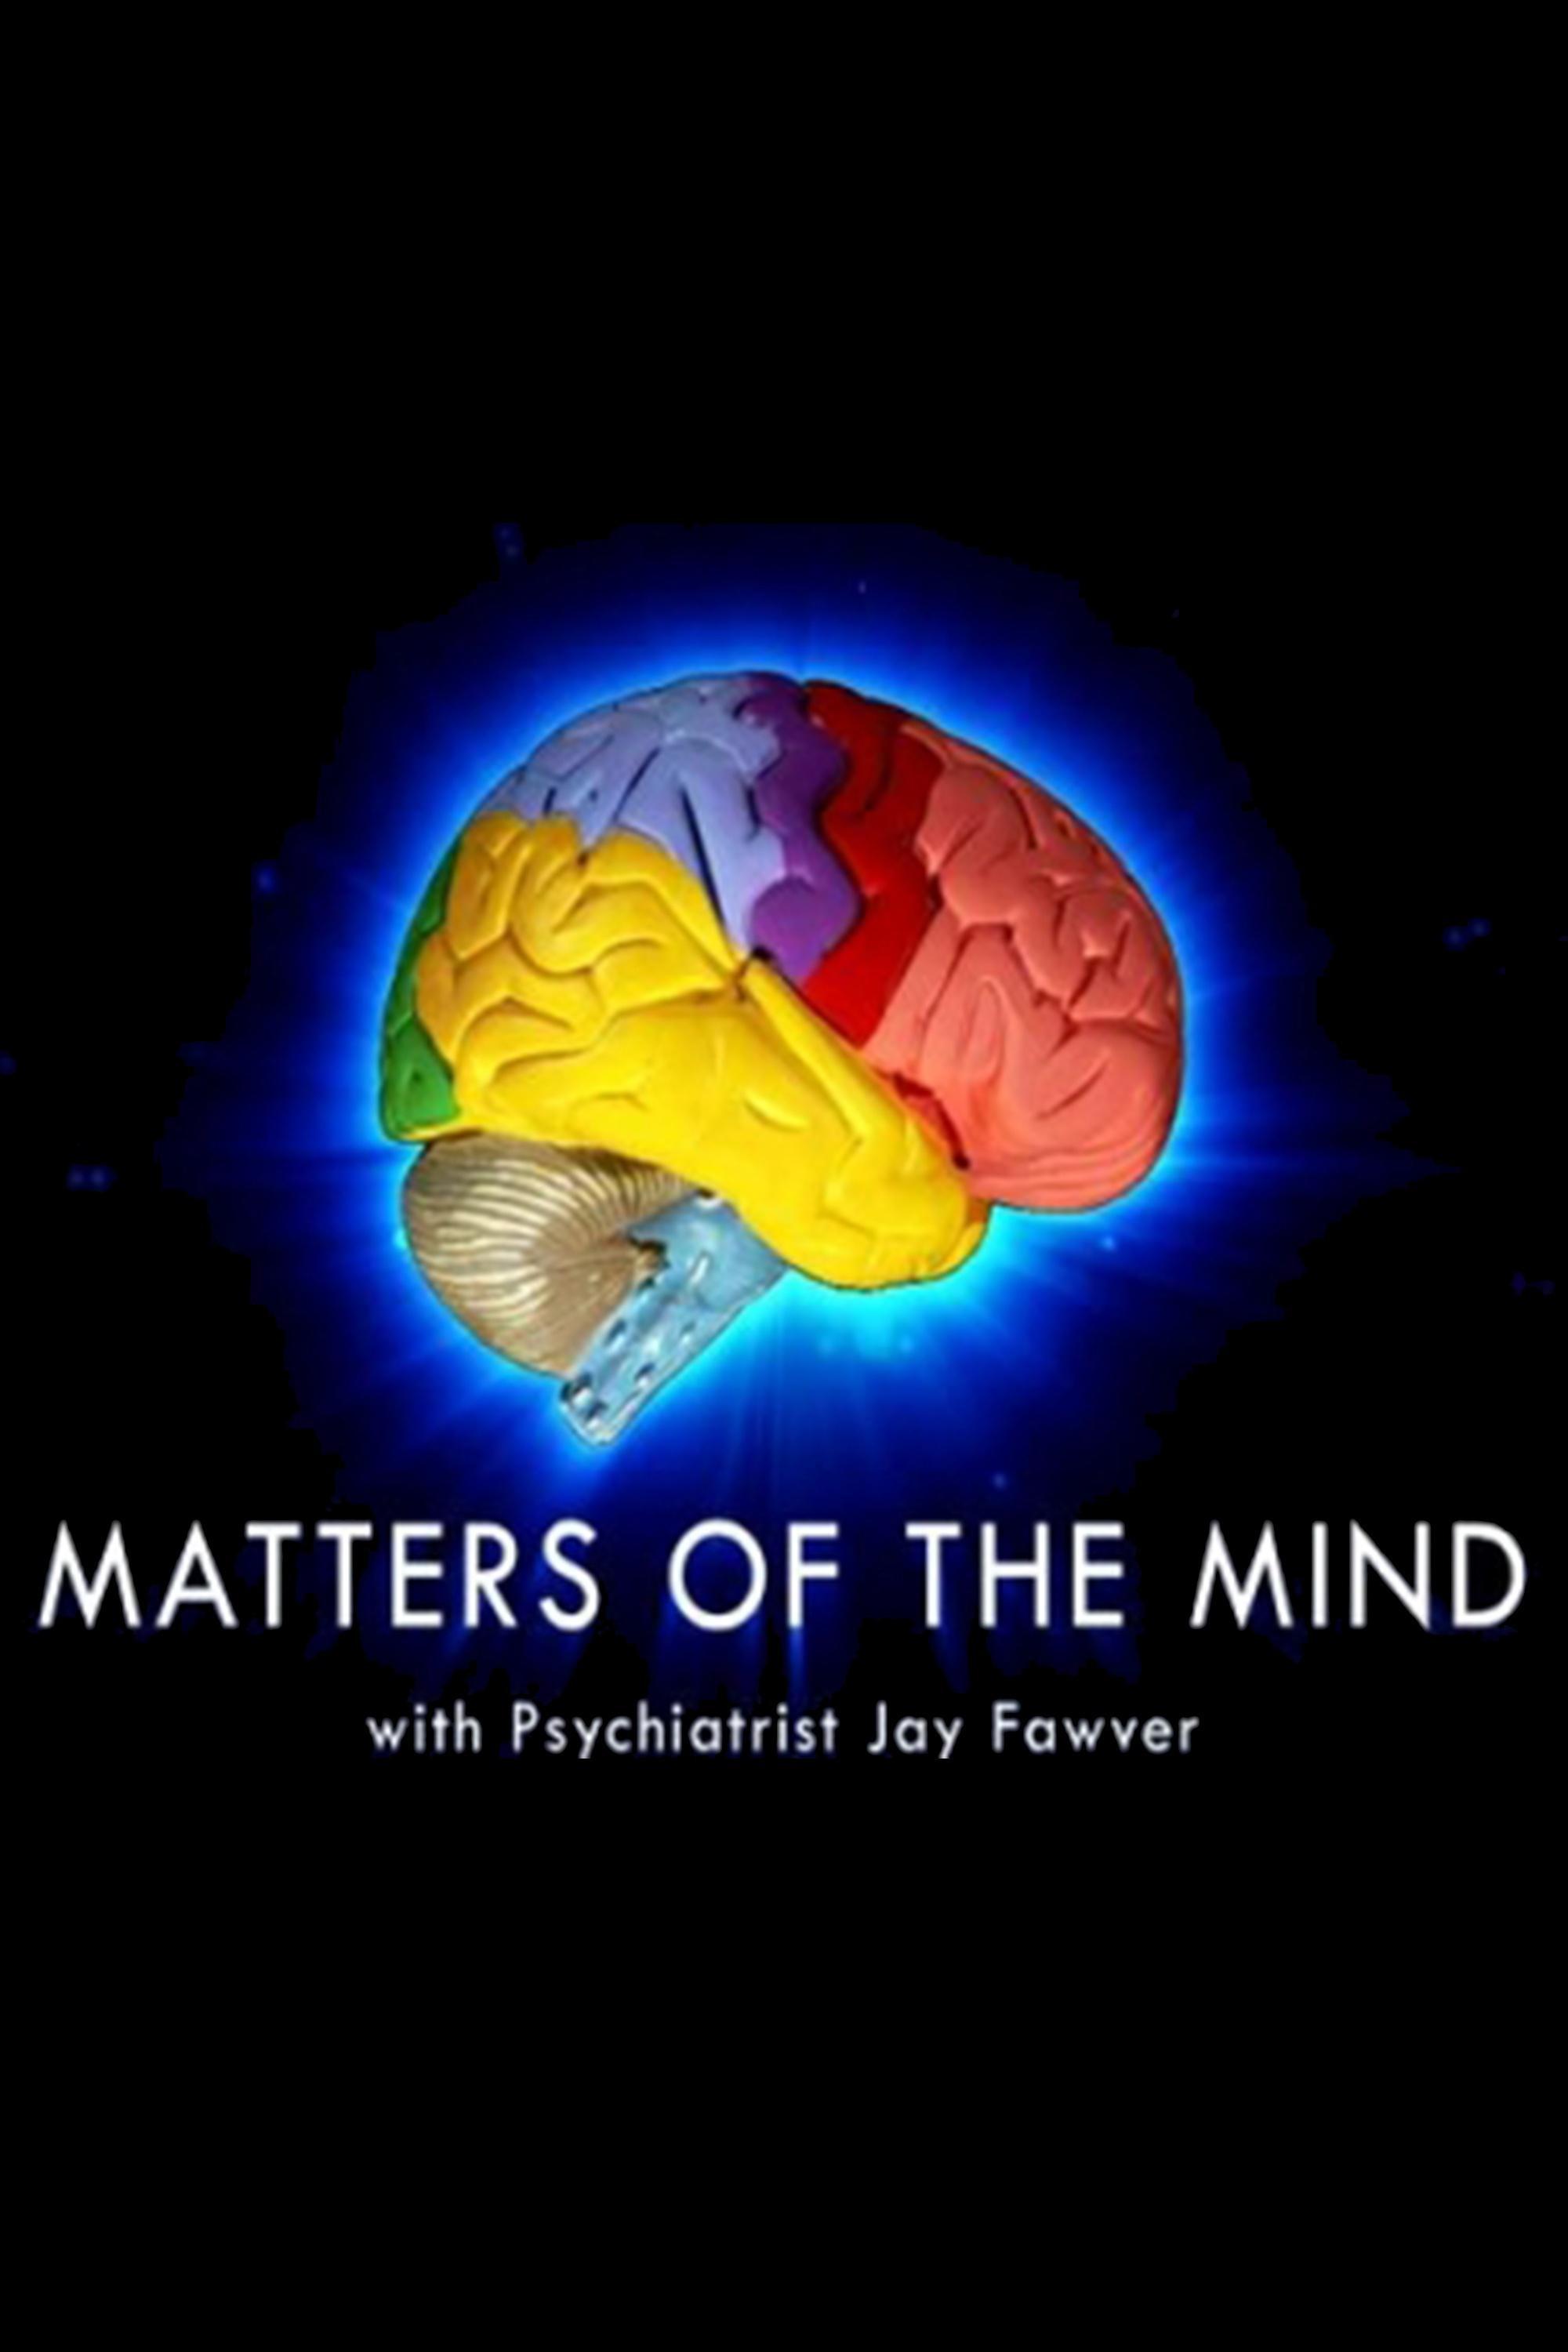 Matters Of The Mind with Dr. Jay Fawver on PBS Fort Wayne